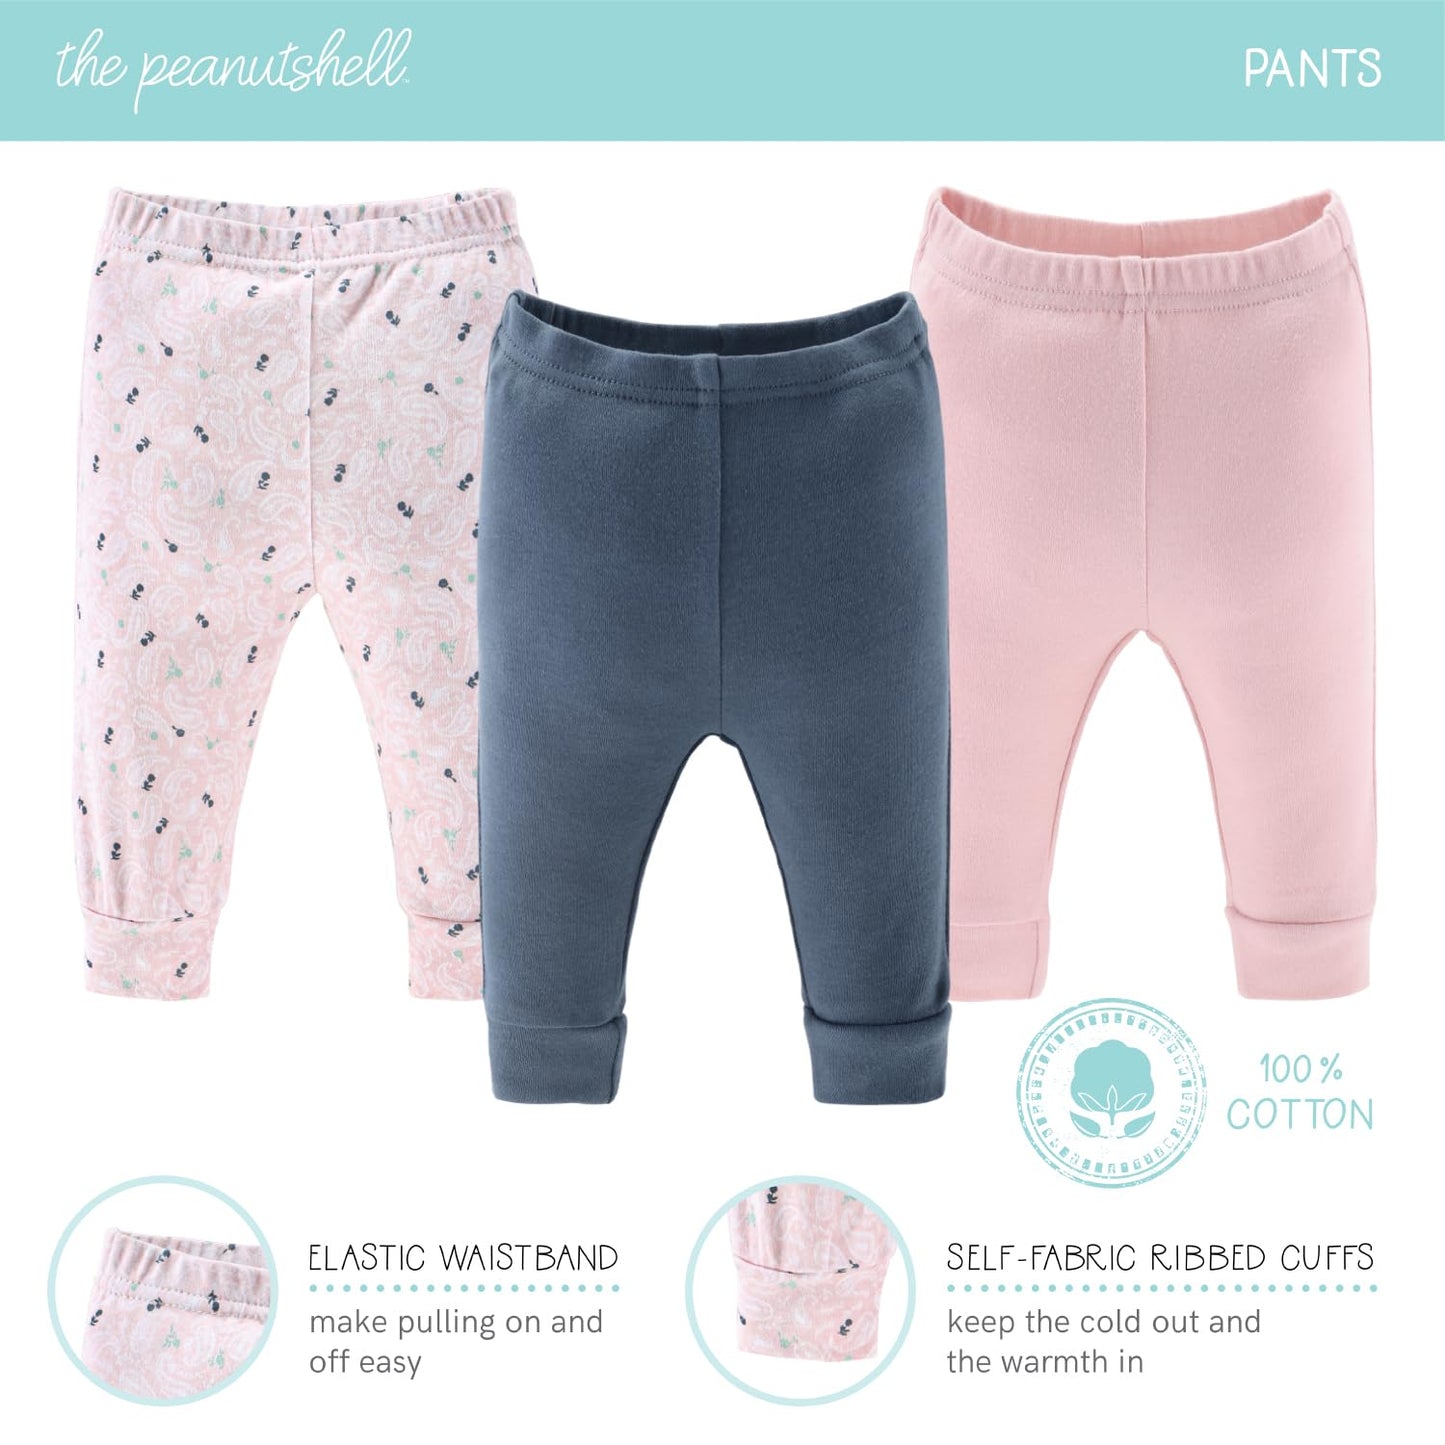 The Peanutshell Newborn Clothes & Accessories Gift Set for Baby Girls - 16 Piece Layette Set - Floral - Fits Newborn to 3 Months